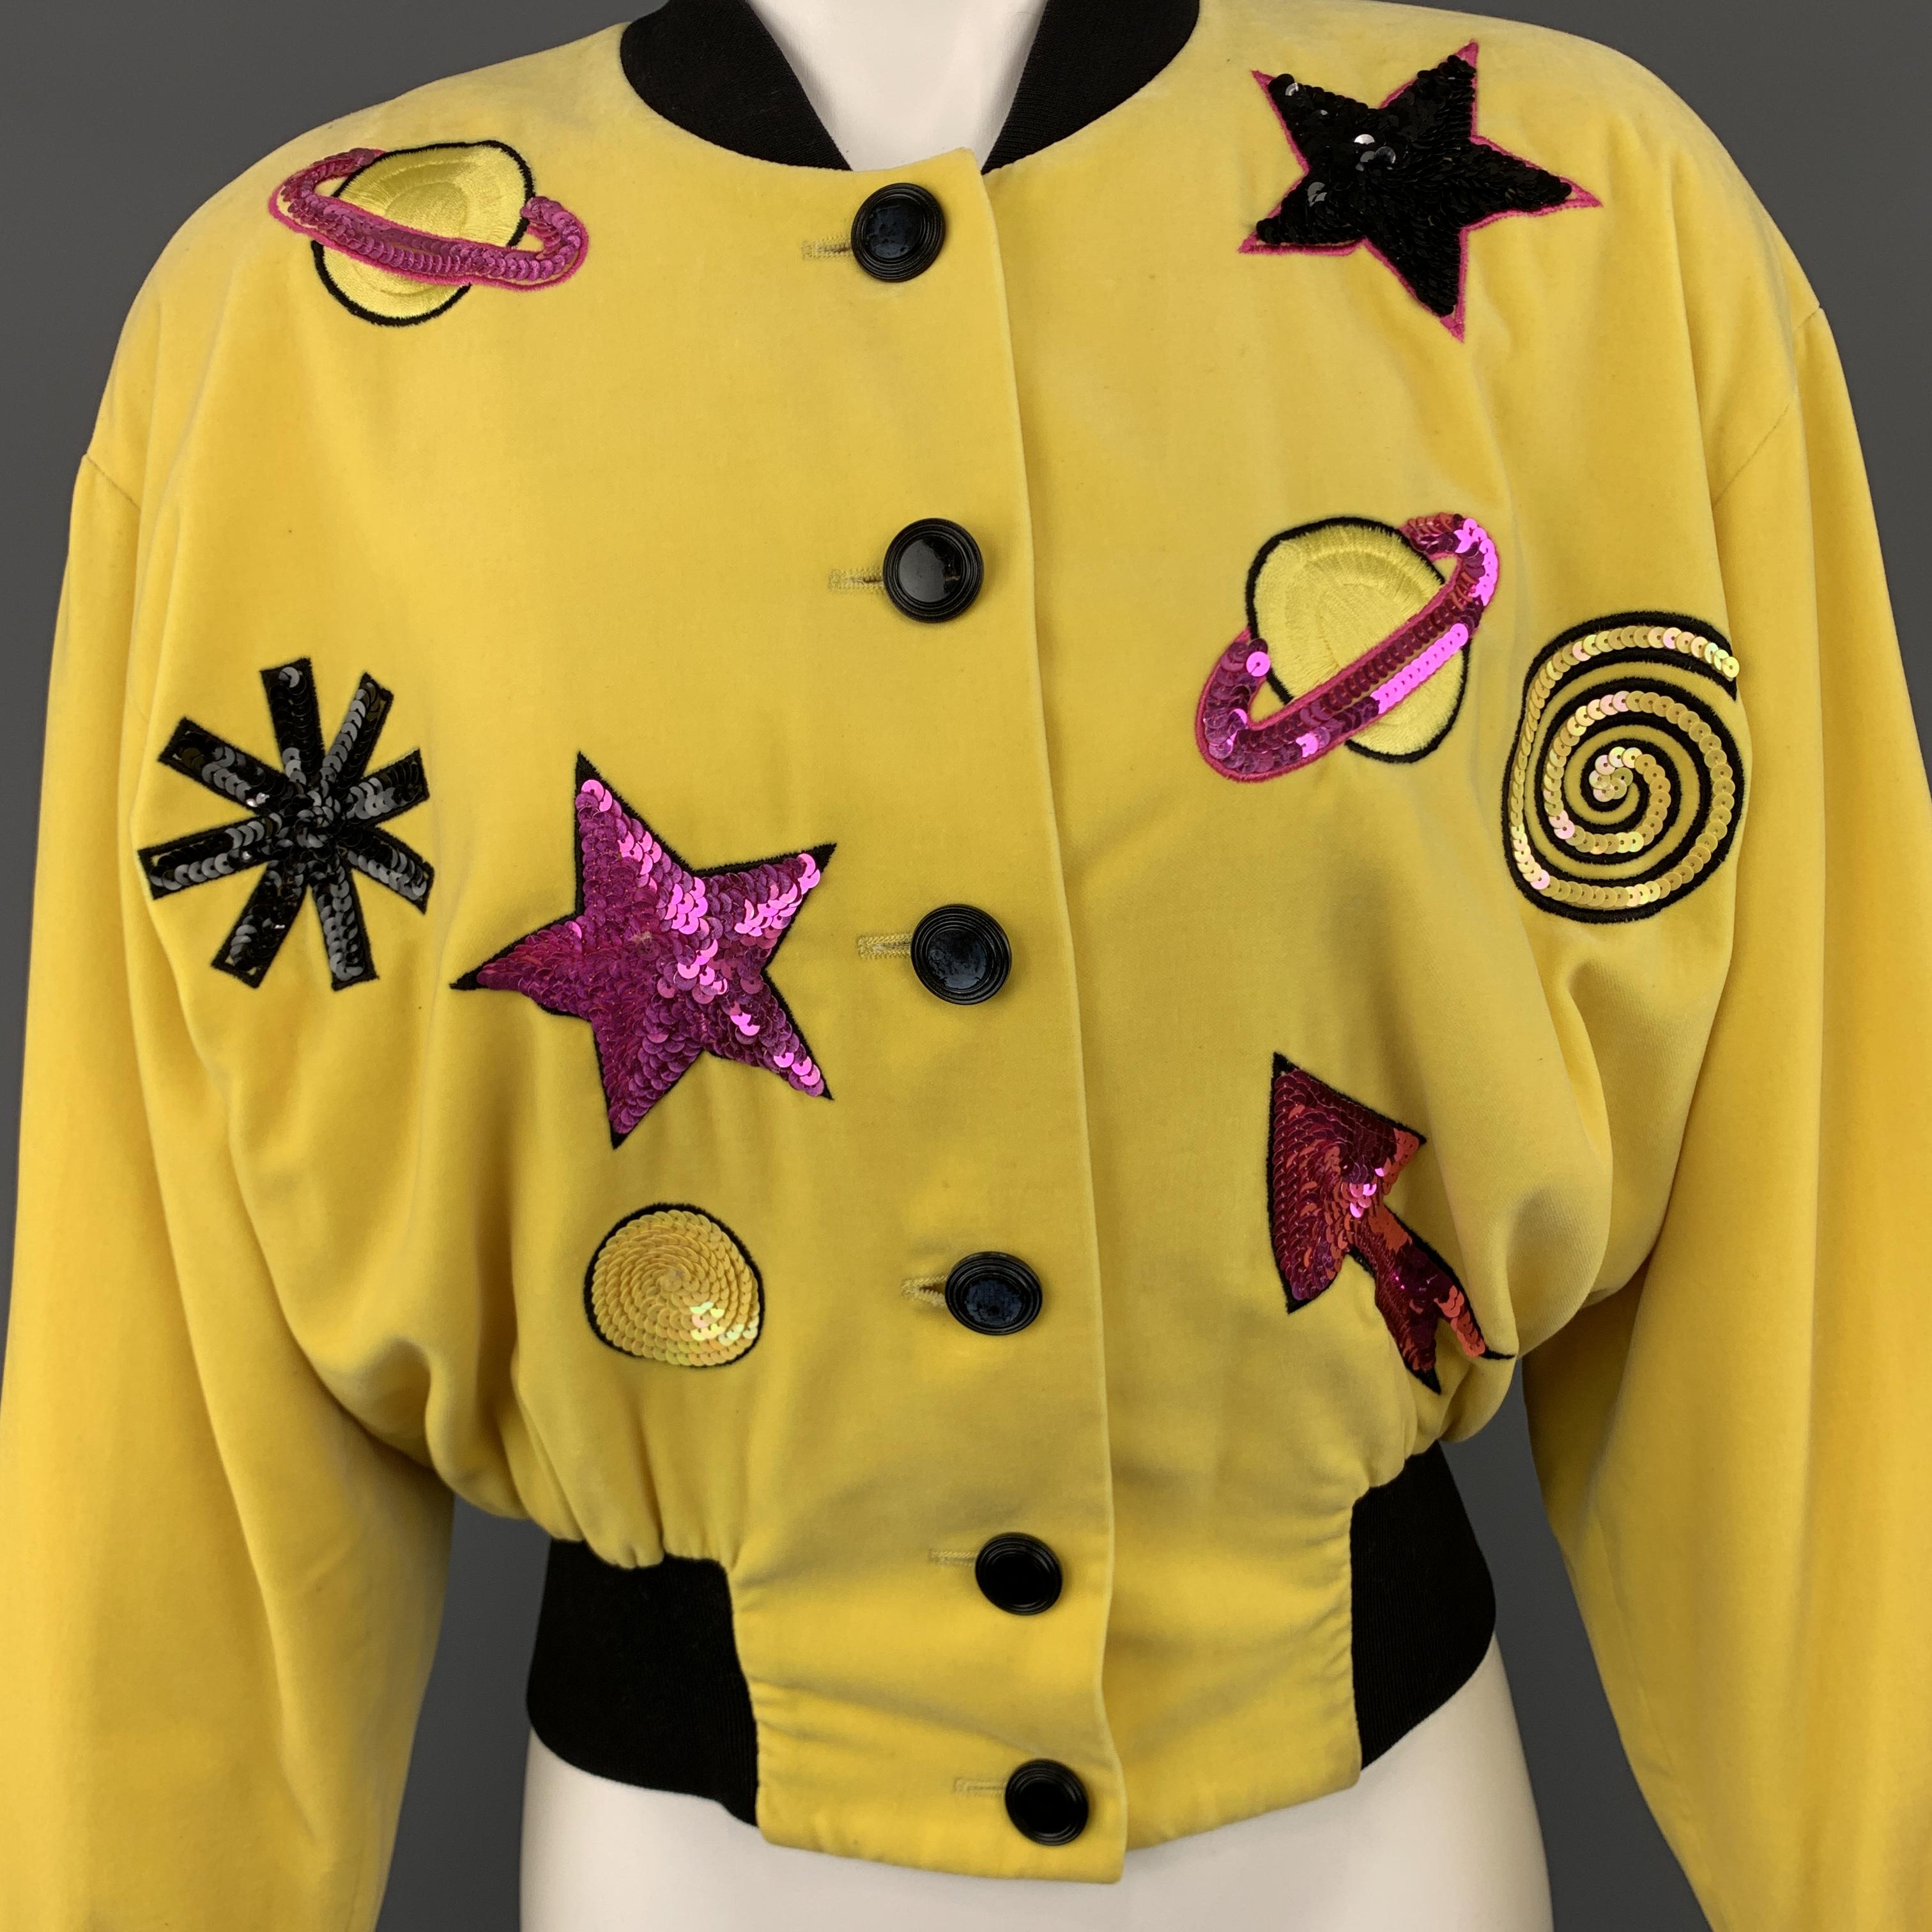 Vintage ESCADA bomber jacket comes in yellow velvet with a black baseball collar and waistband, pink sequined saturn, star, and arrow patches, and embroidered 